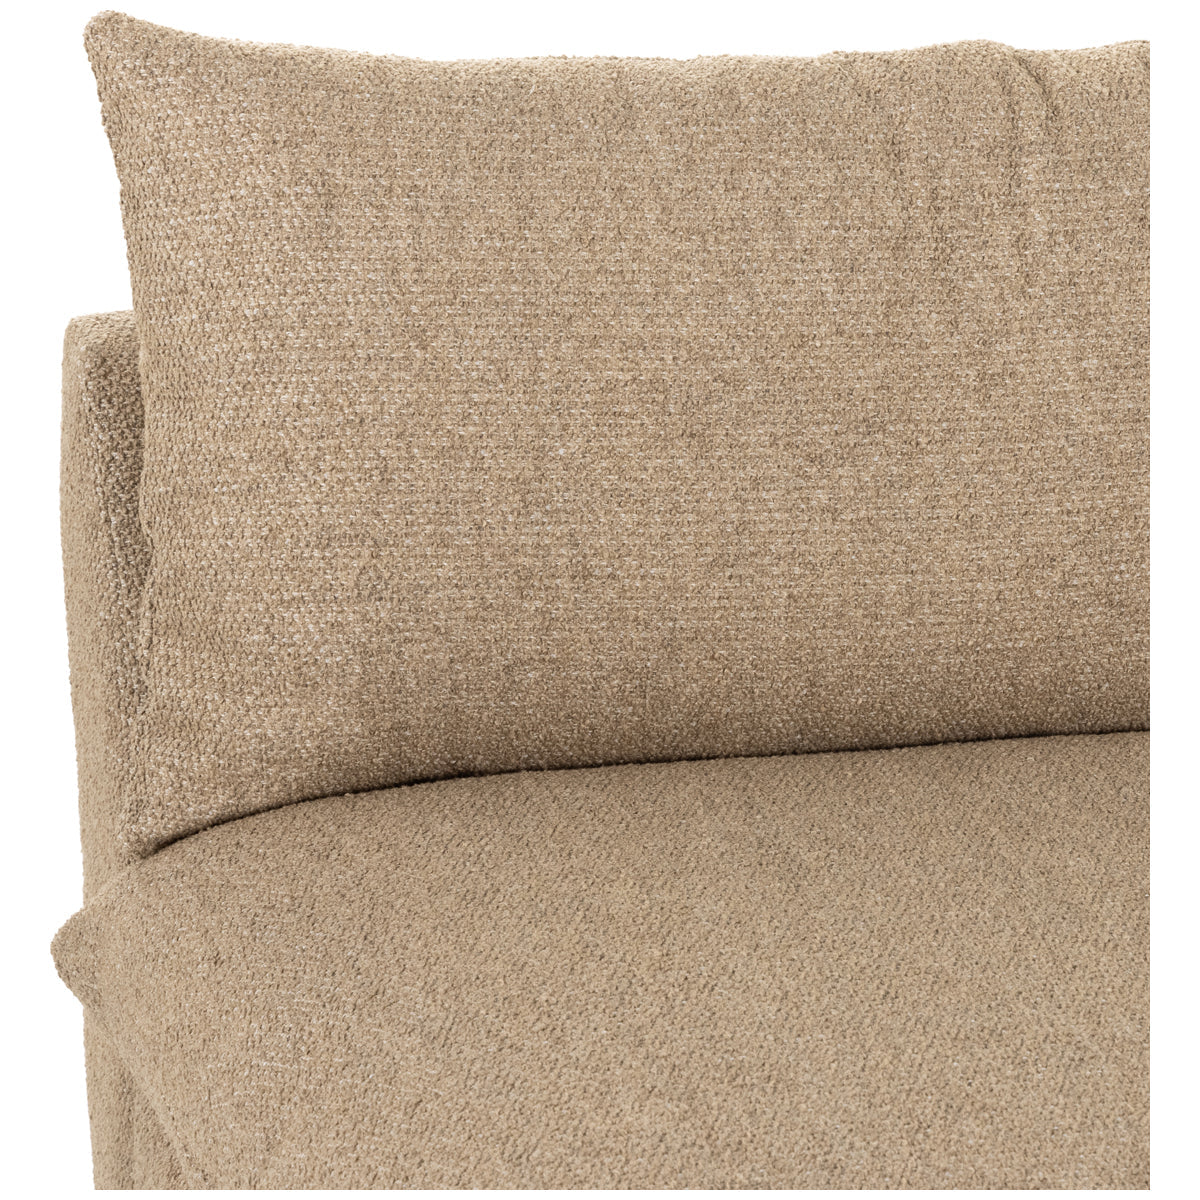 Four Hands Atelier Grant 3-Piece Sectional - Heron Sand